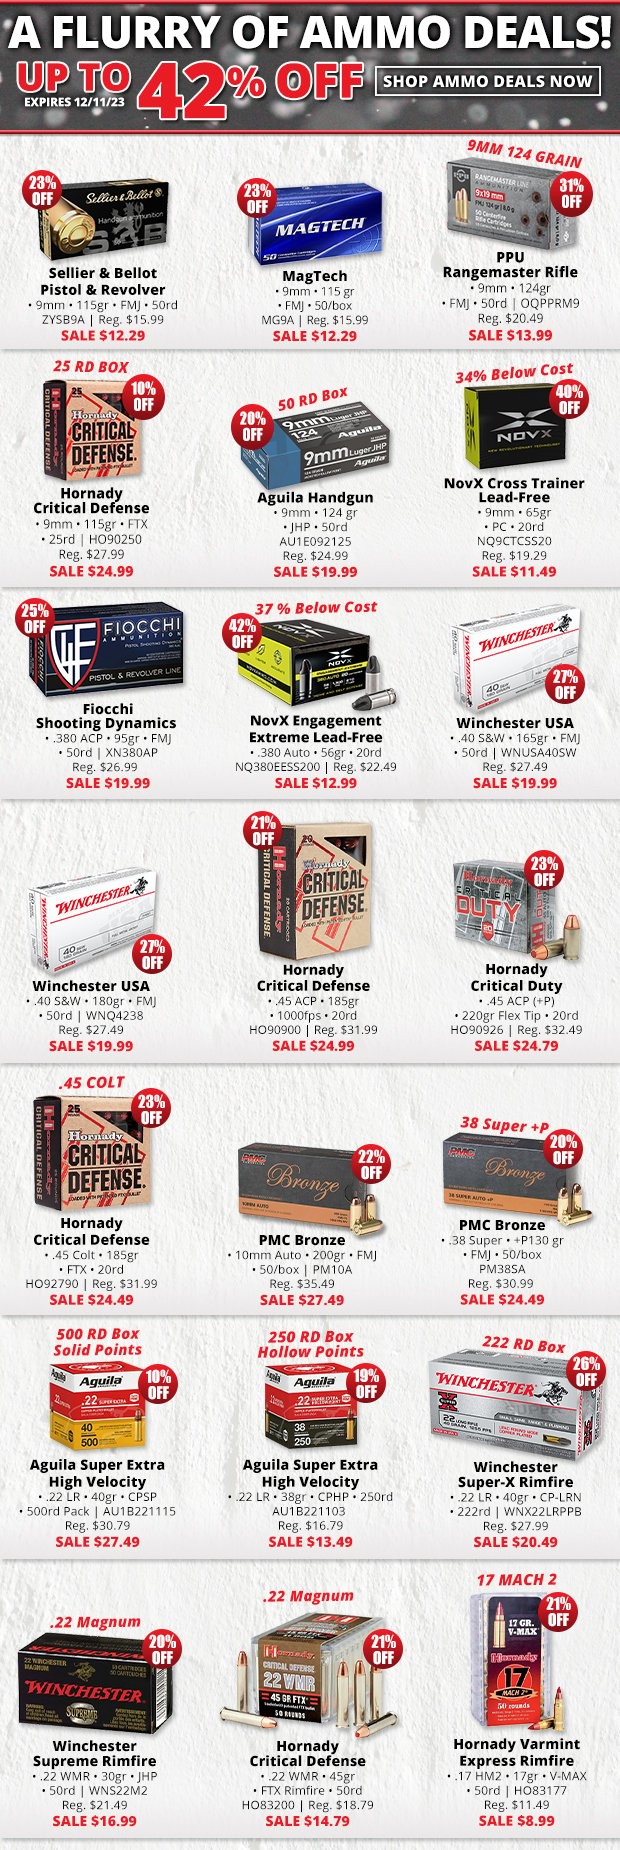 A Flurry of Ammo Deals Up to 42% Off!